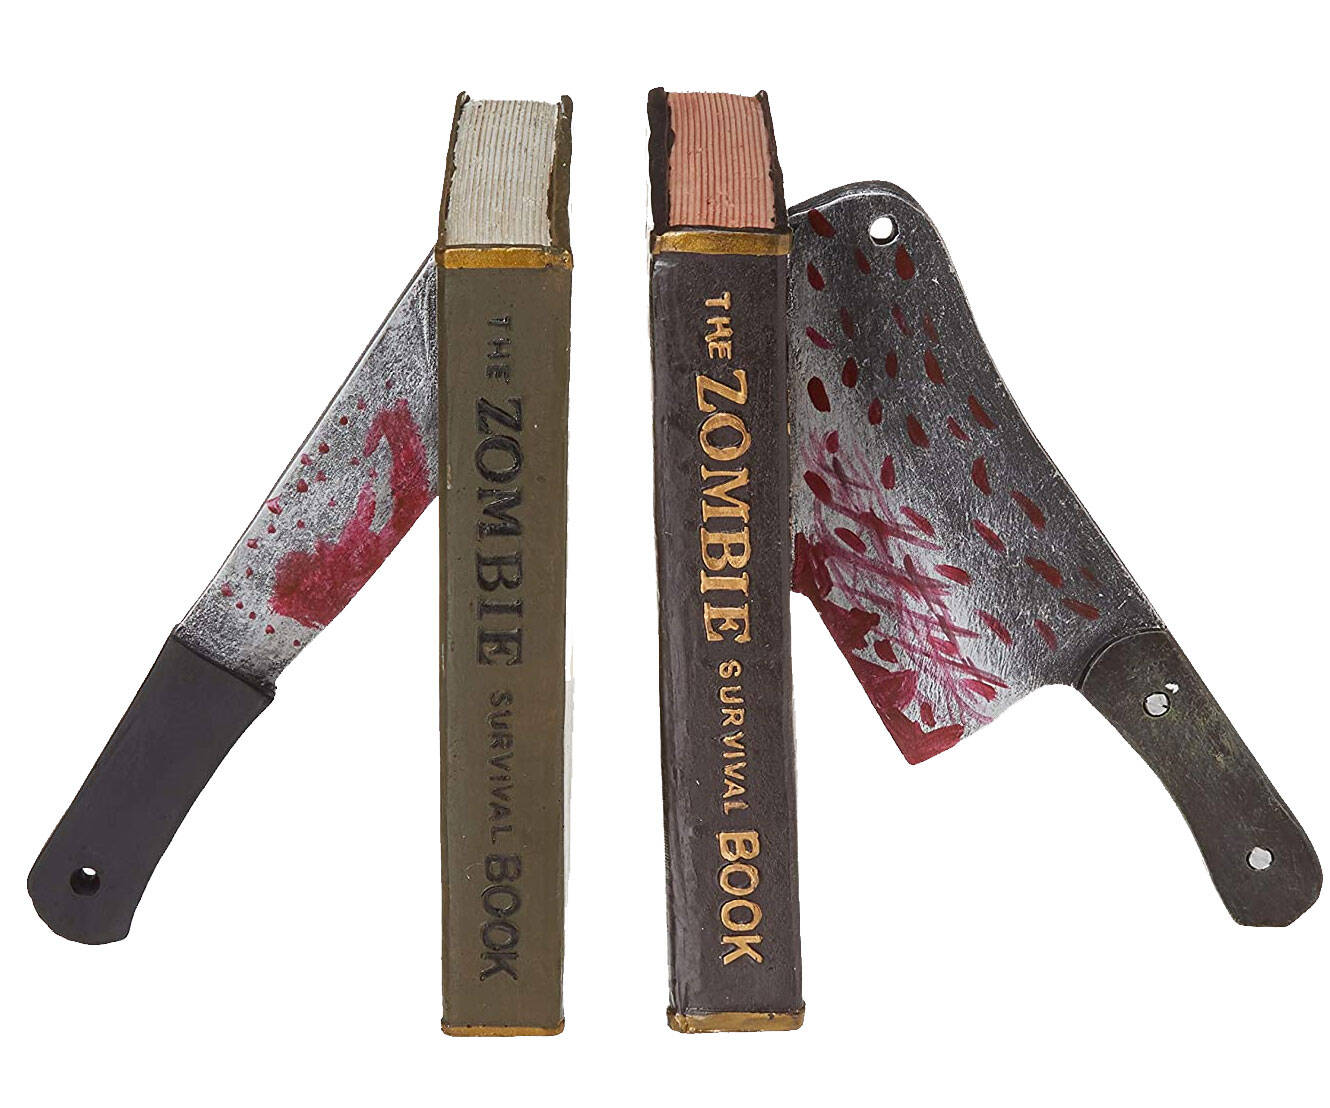 Bloody Cleaver Bookends - coolthings.us